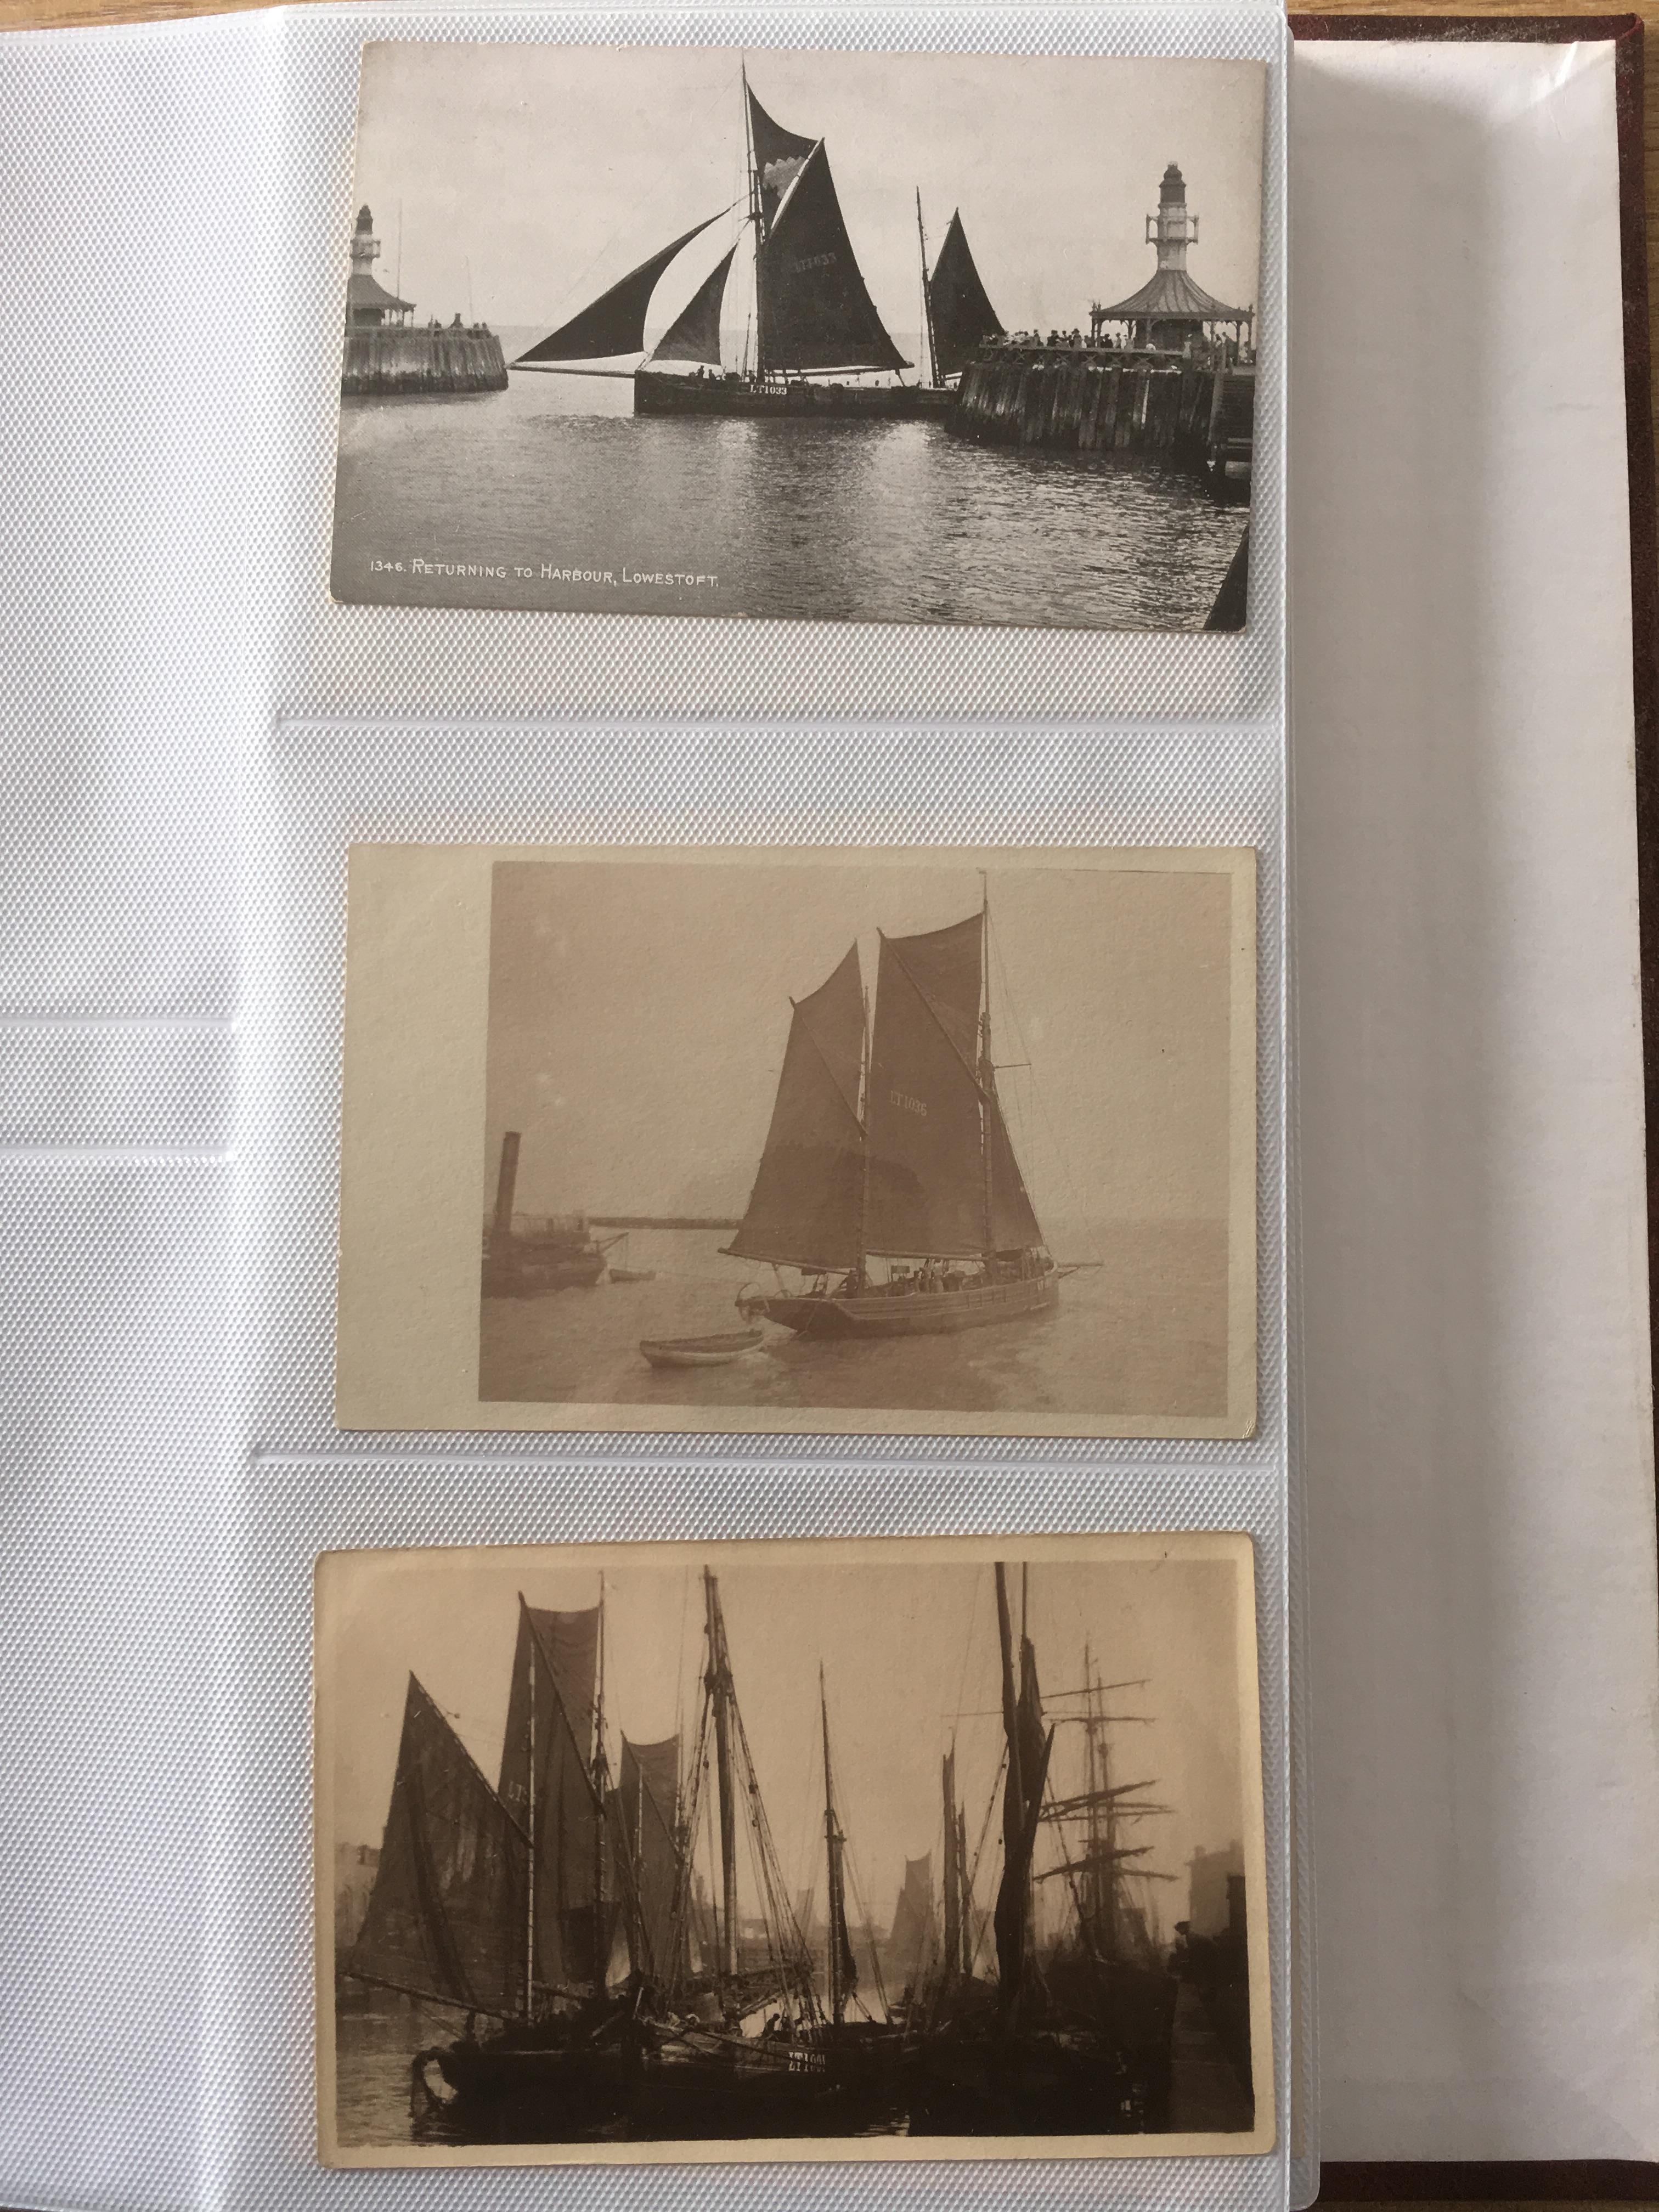 SUFFOLK: ALBUM WITH A COLLECTION OF LOWESTOFT FISHING INDUSTRY POSTCARDS AND A FEW PHOTOS. - Image 8 of 8